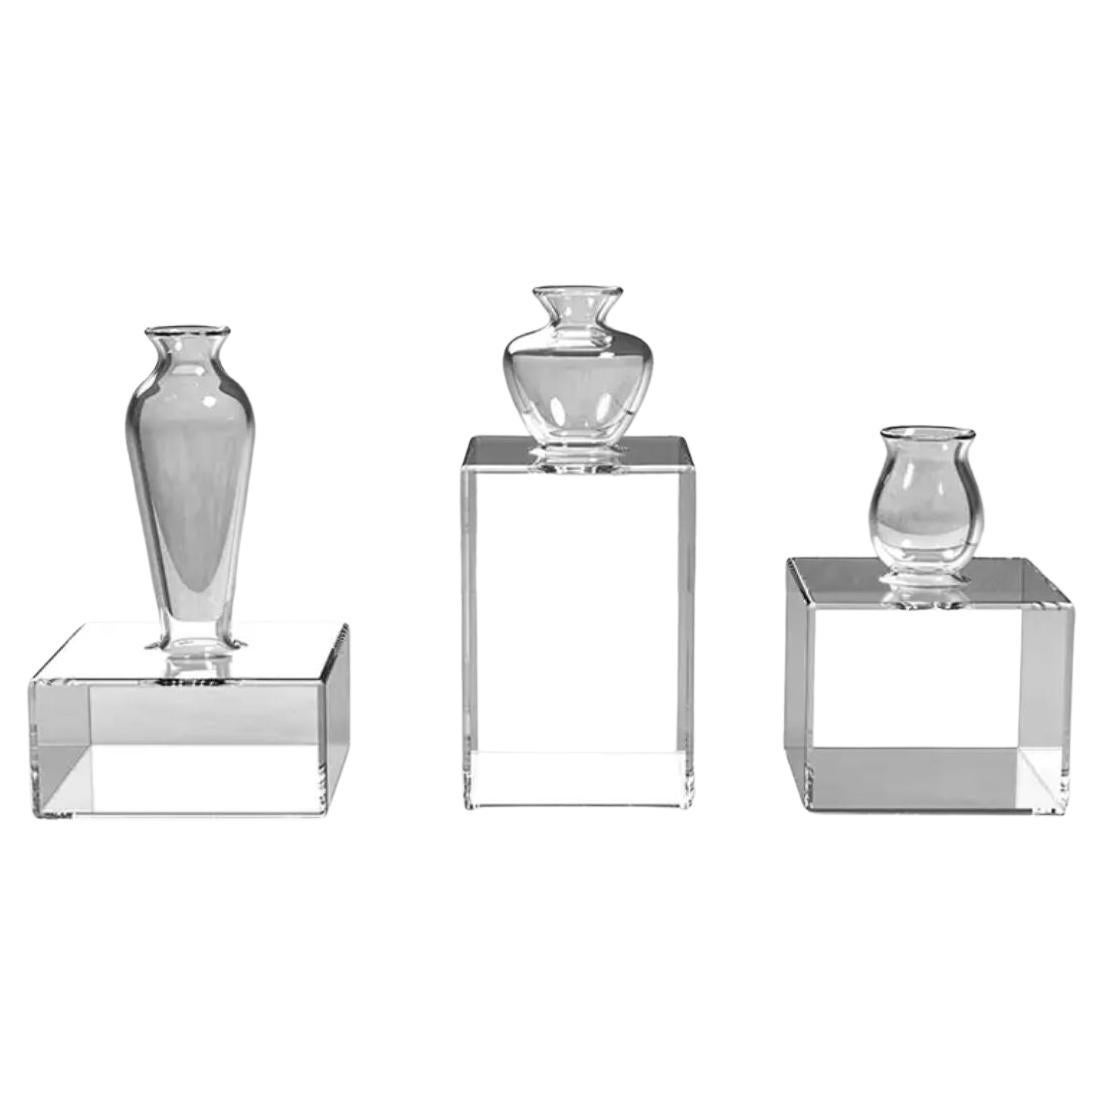 Set of 3 Milo Square Transparent Vases by Mason Editions For Sale